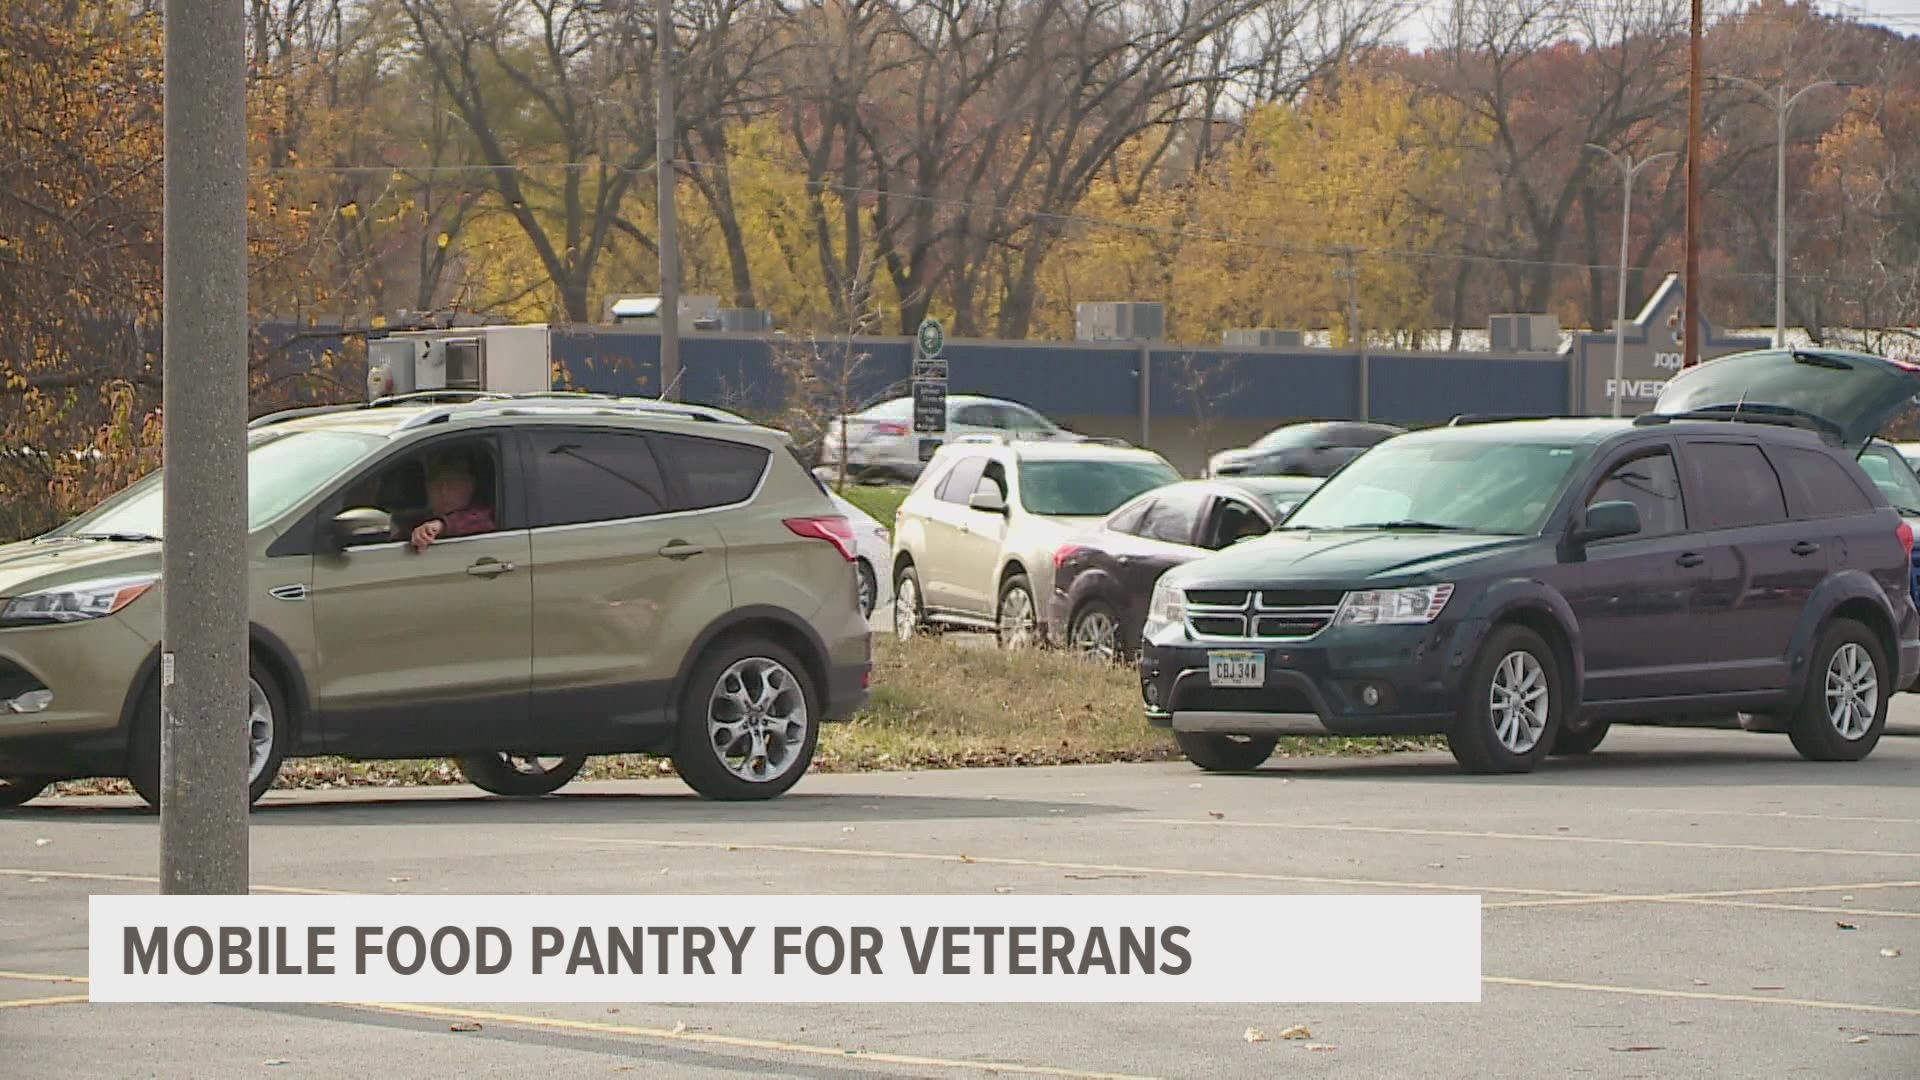 The Food Bank of Iowa implemented the Mobile Food Bank to alleviate food insecurity amongst veterans.